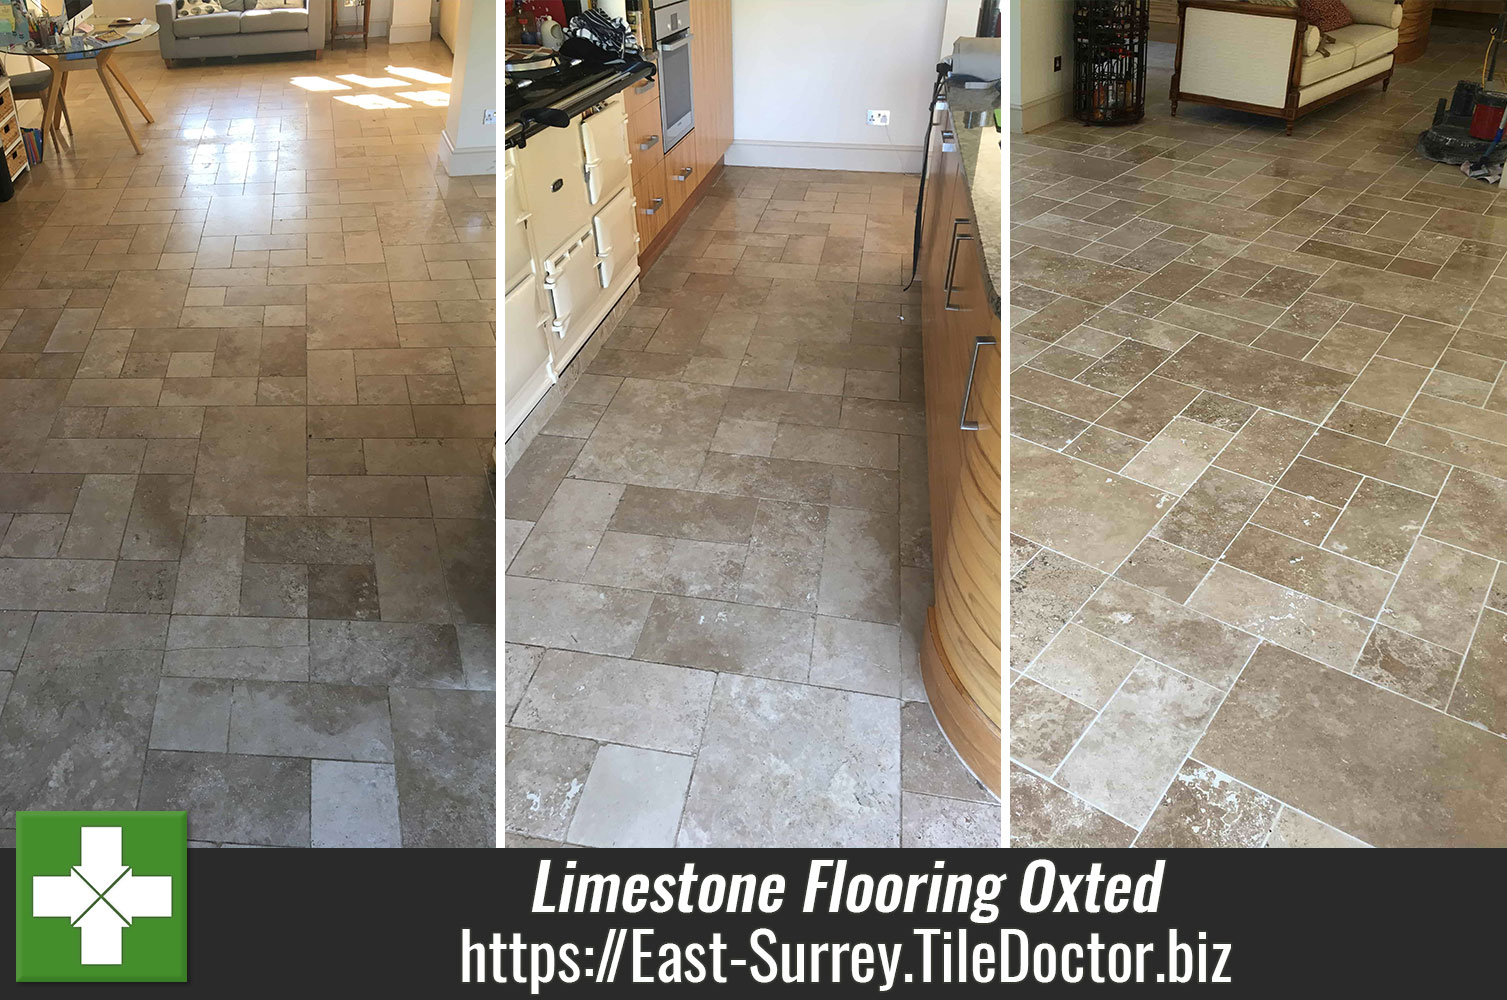 Limestone Kitchen Floor Cleaning and Polishing Oxted